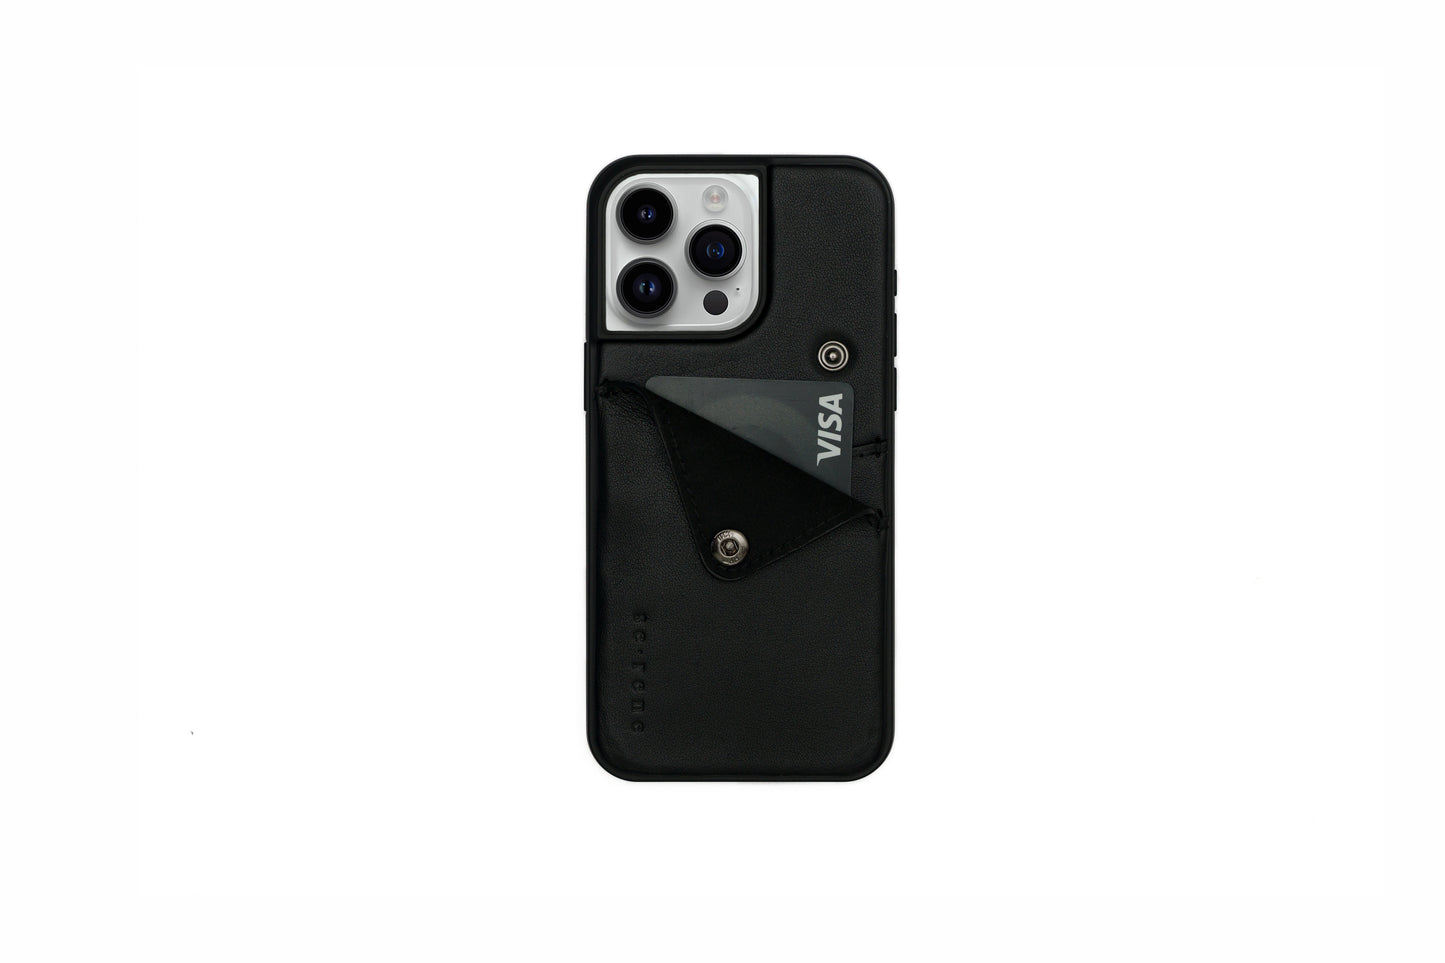 Mens iPhone Cover - Black Leather